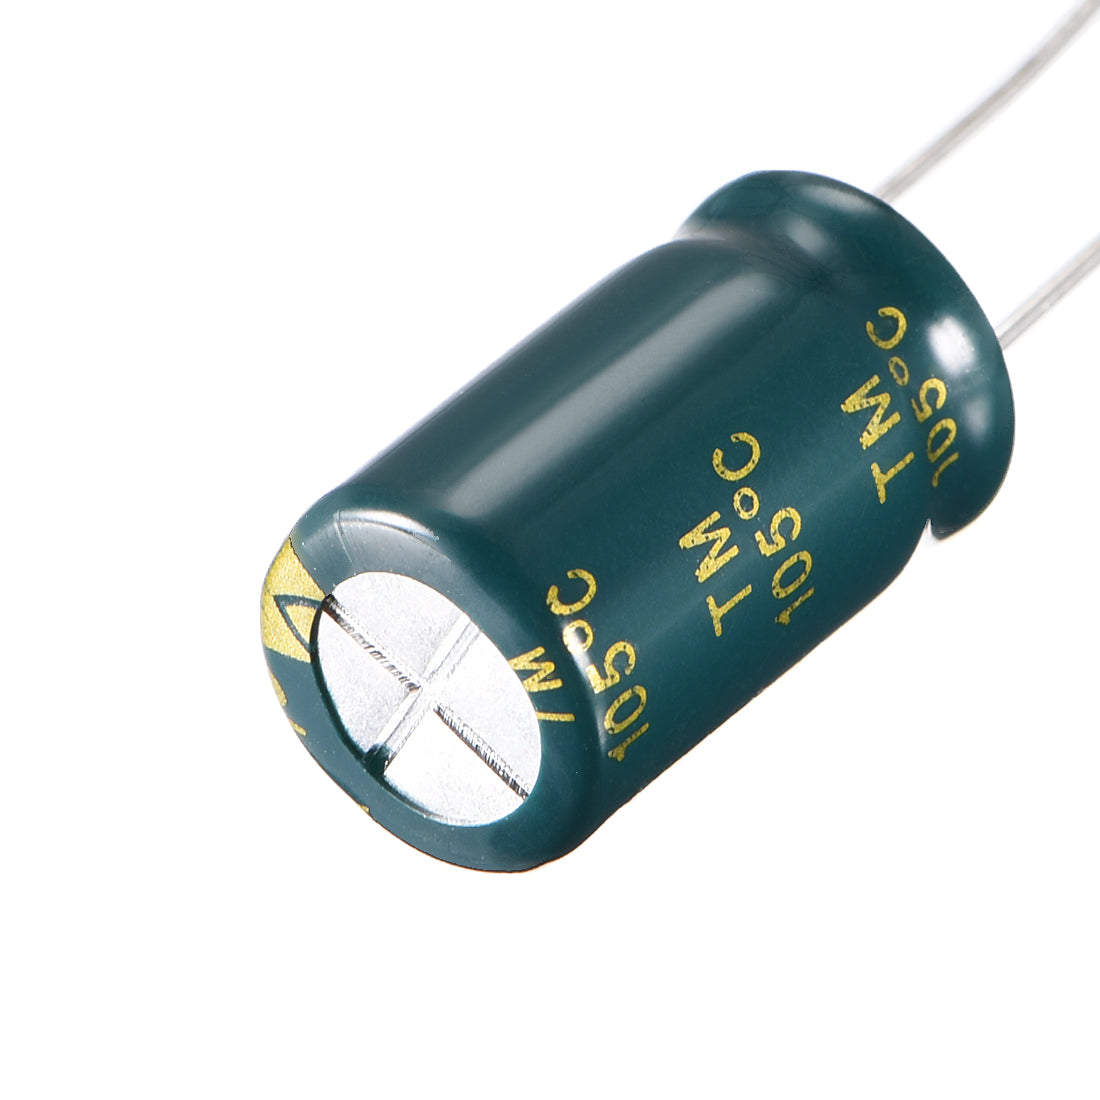 uxcell Uxcell Aluminum Radial Electrolytic Capacitor Low ESR Green with 1000UF 16V 105 Celsius Life 3000H 10 x 17 mm High Ripple Current,Low Impedance 20pcs